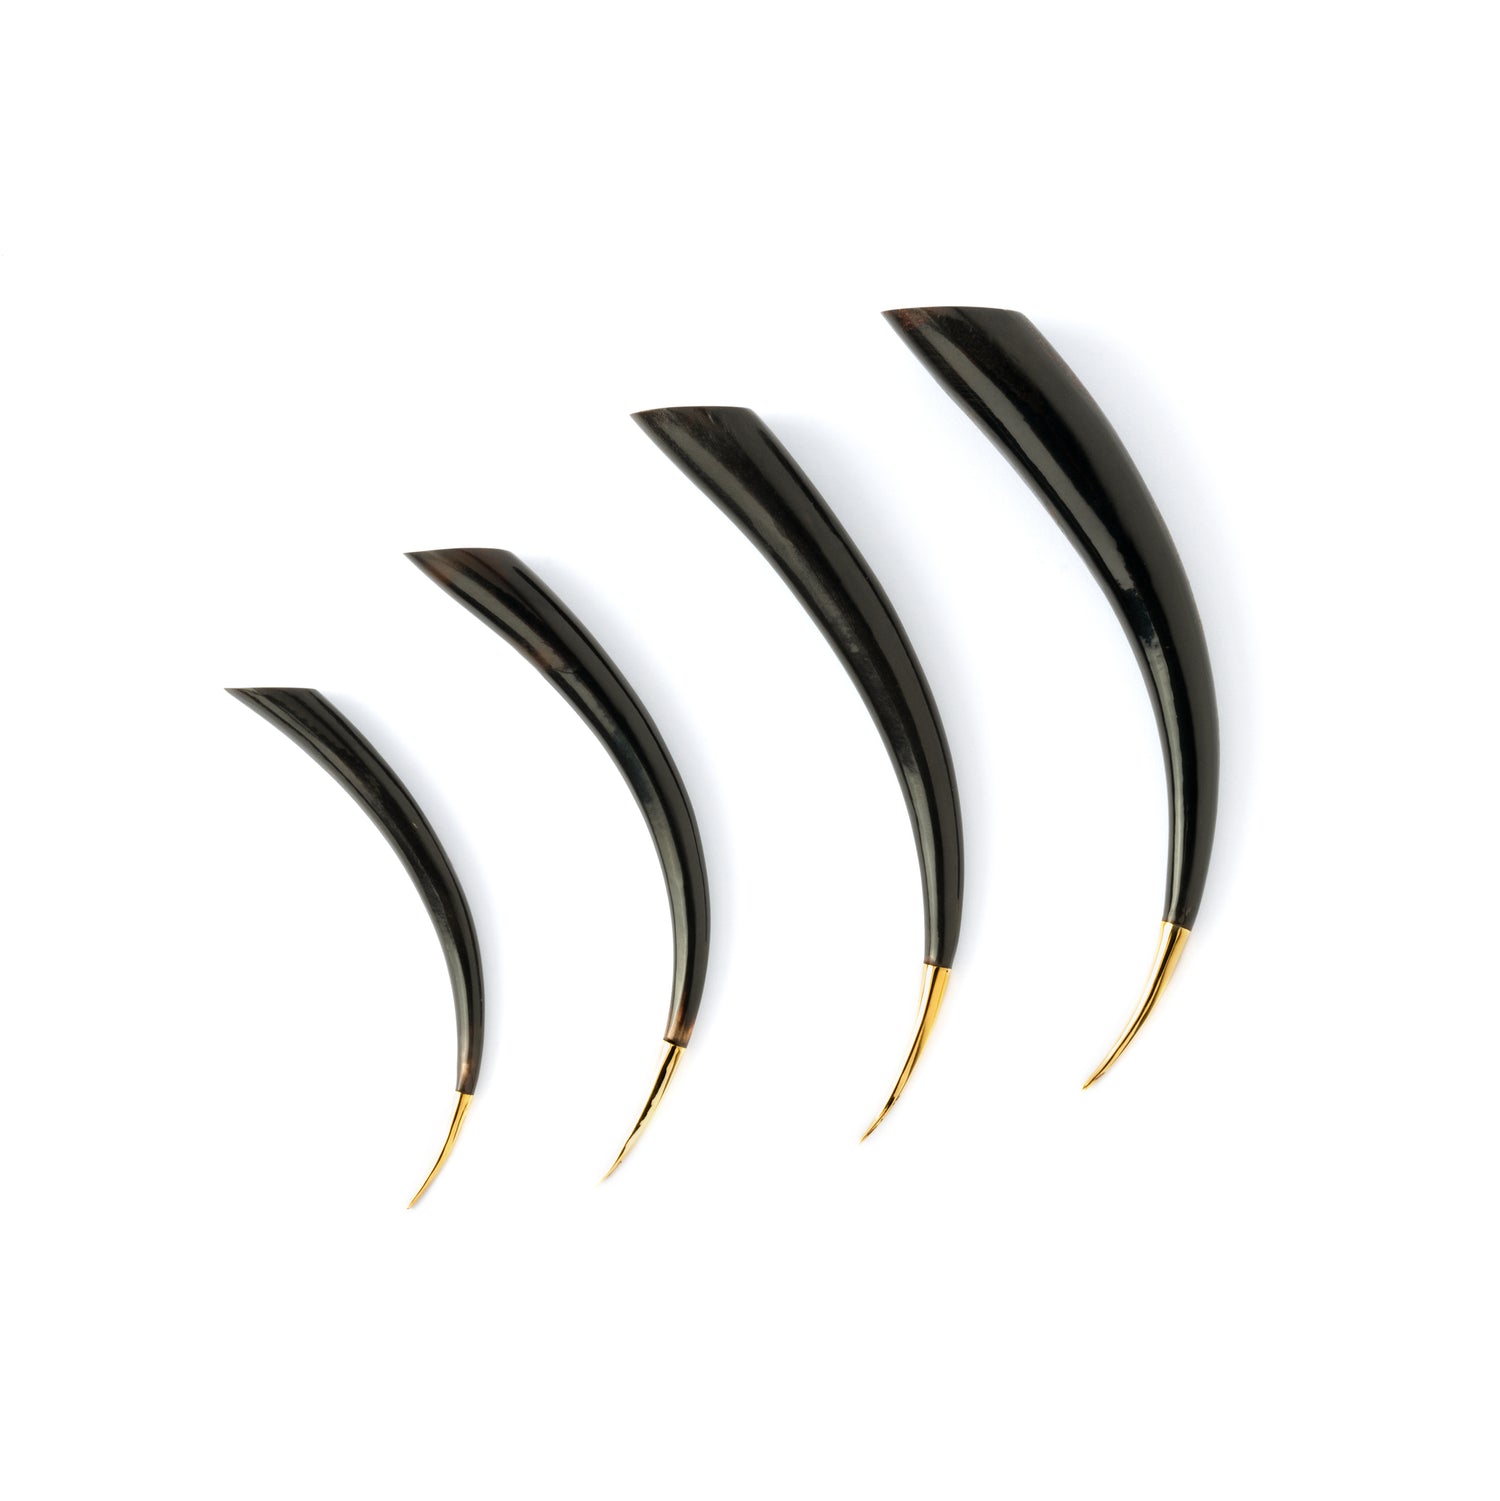 several sizes of Black spike with golden tip ear stretchers side view